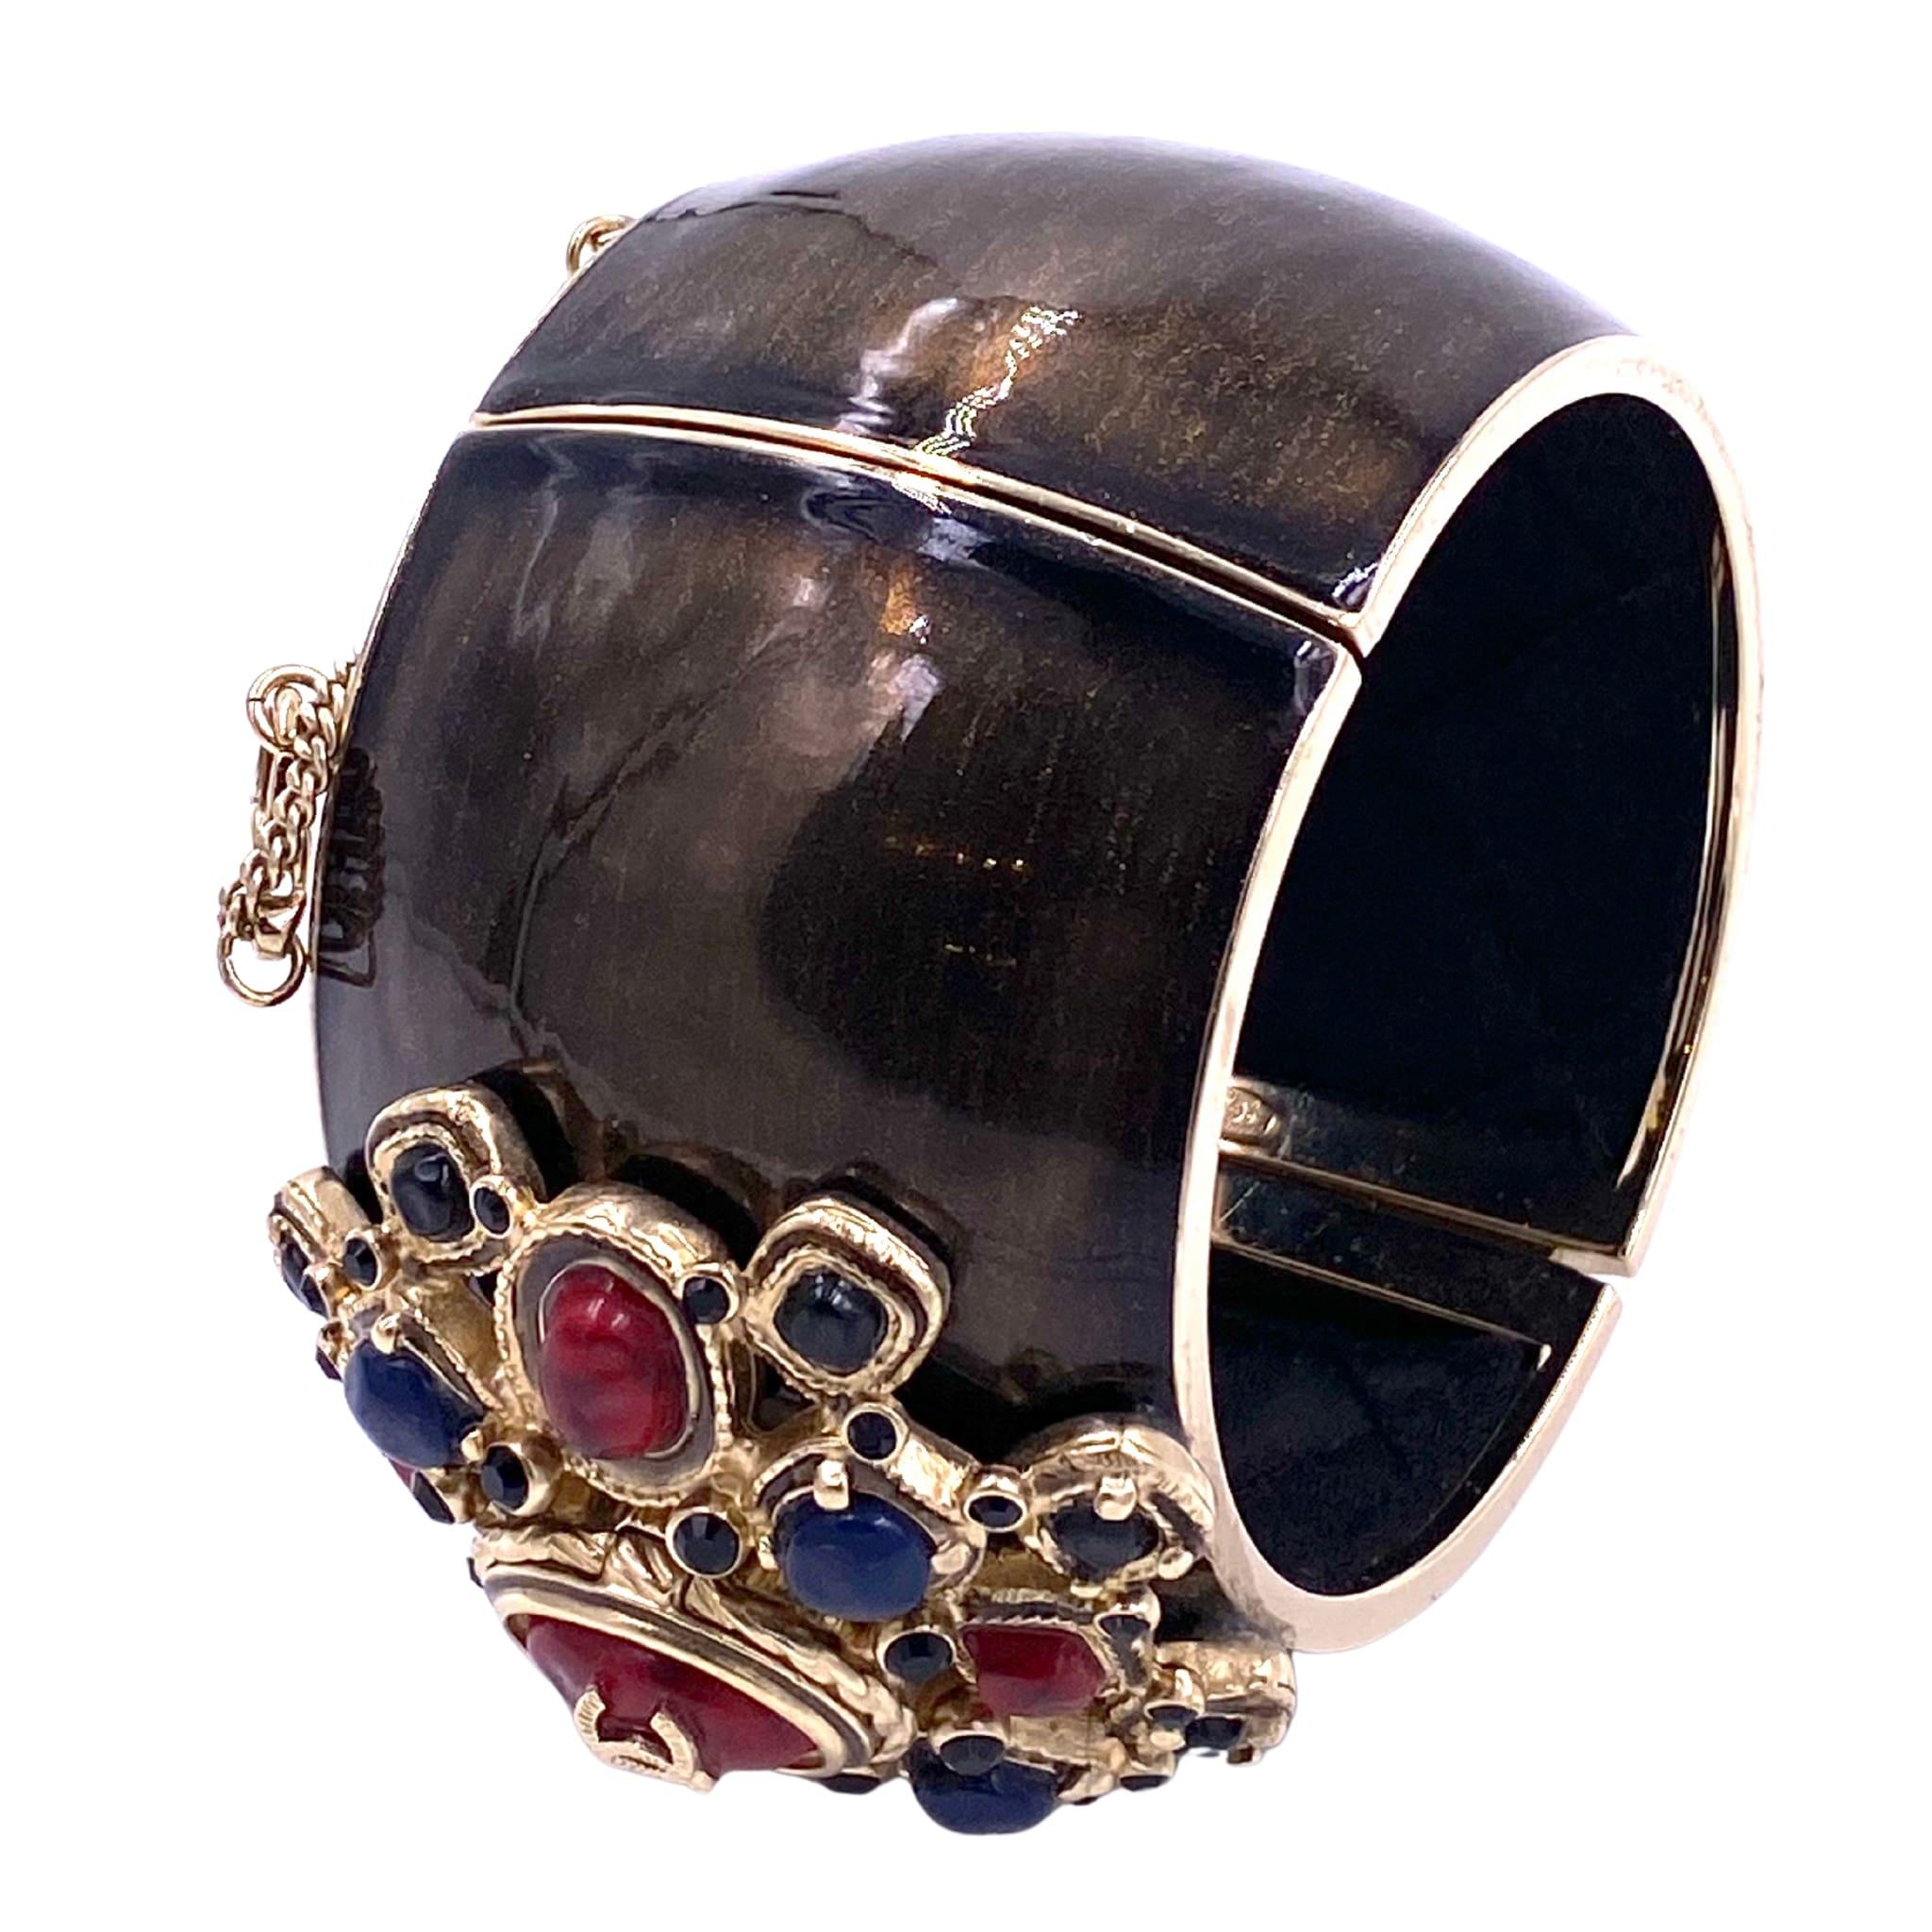 This Chanel 2006 cuff boasts a striking Maltese Cross design, accented with vibrant red and blue stones and intricate gold outlining. Elevate any outfit with this statement piece, perfect for adding a touch of luxury and sophistication. Expertly